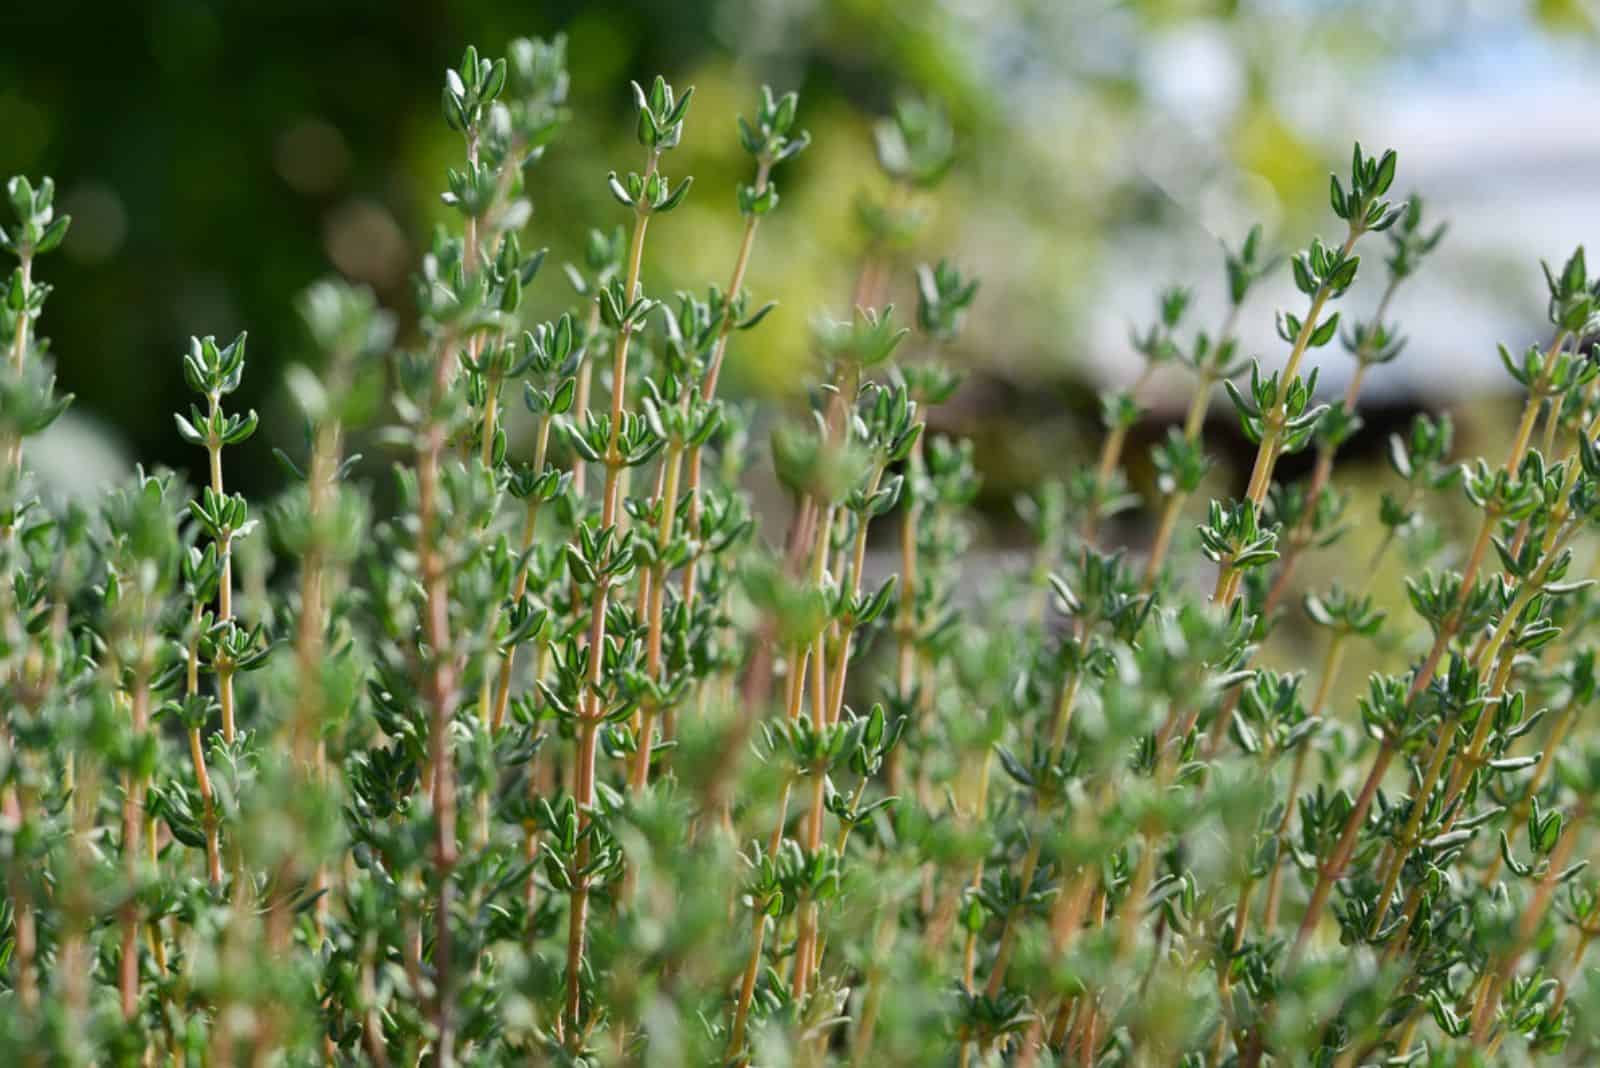  fresh green thyme growing outdoors in the garden